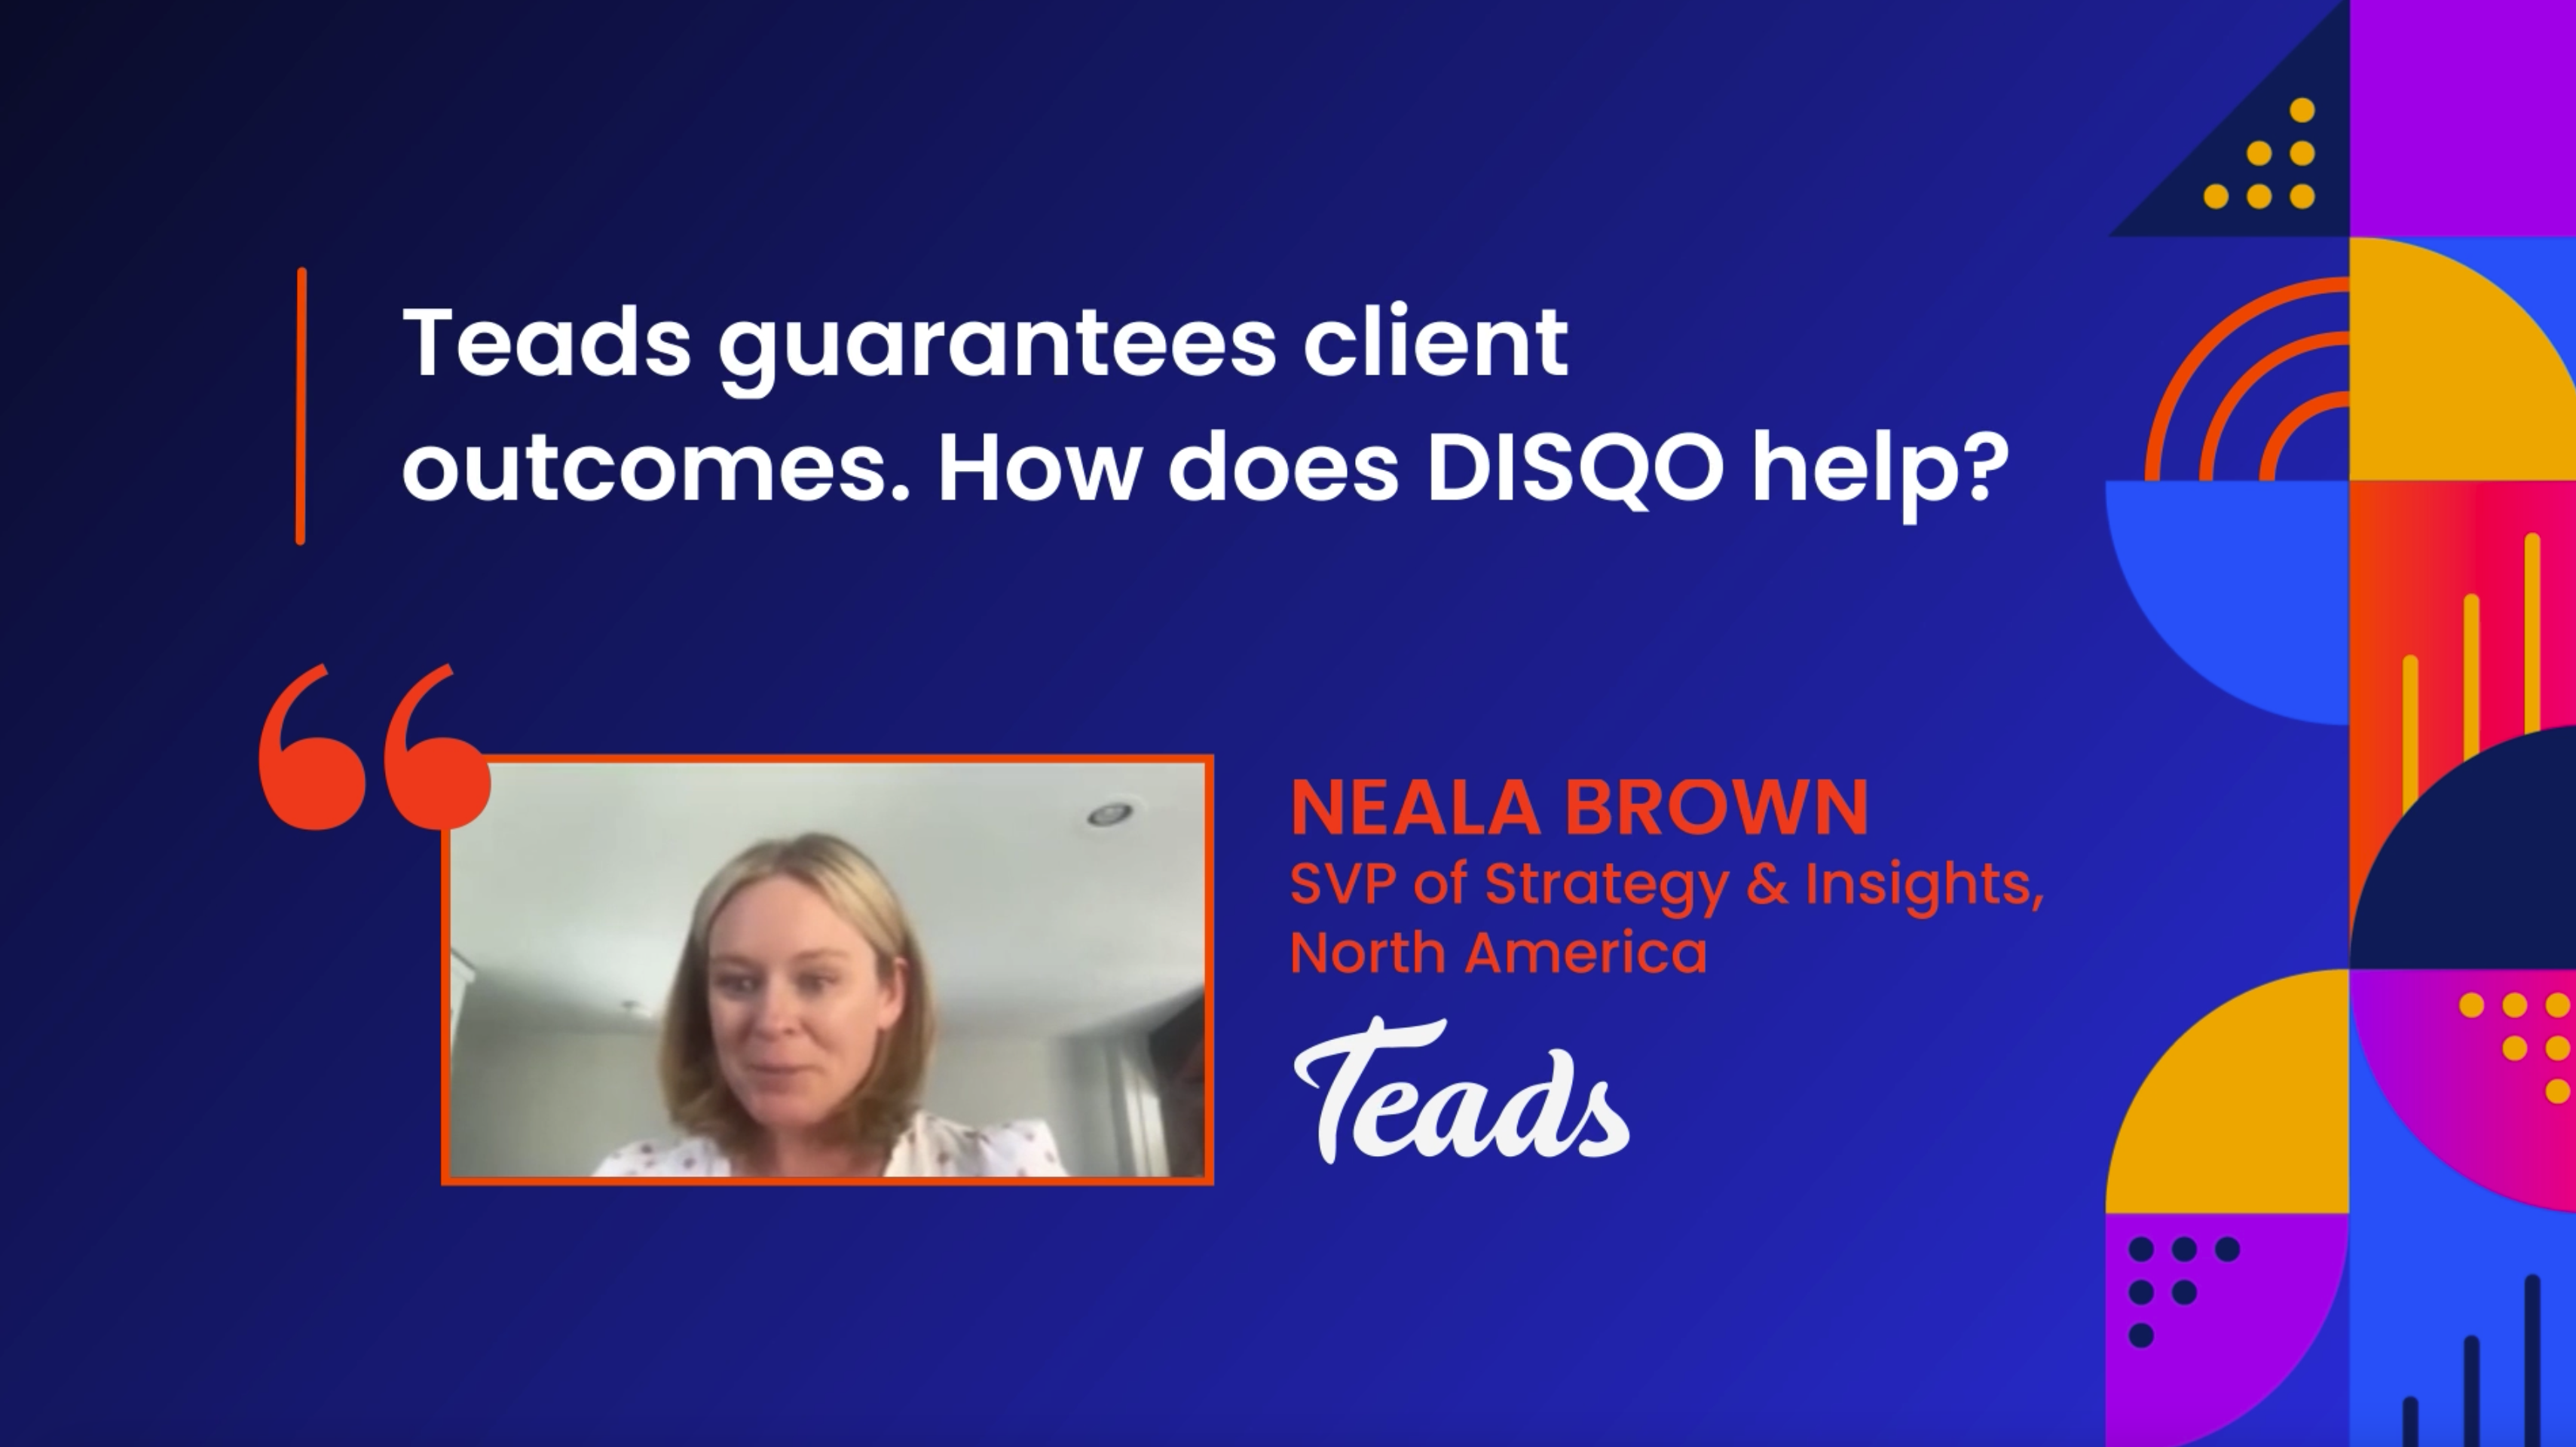 Image of a still from the client video with Teads about how DISQO helps guarantee client outcomes.